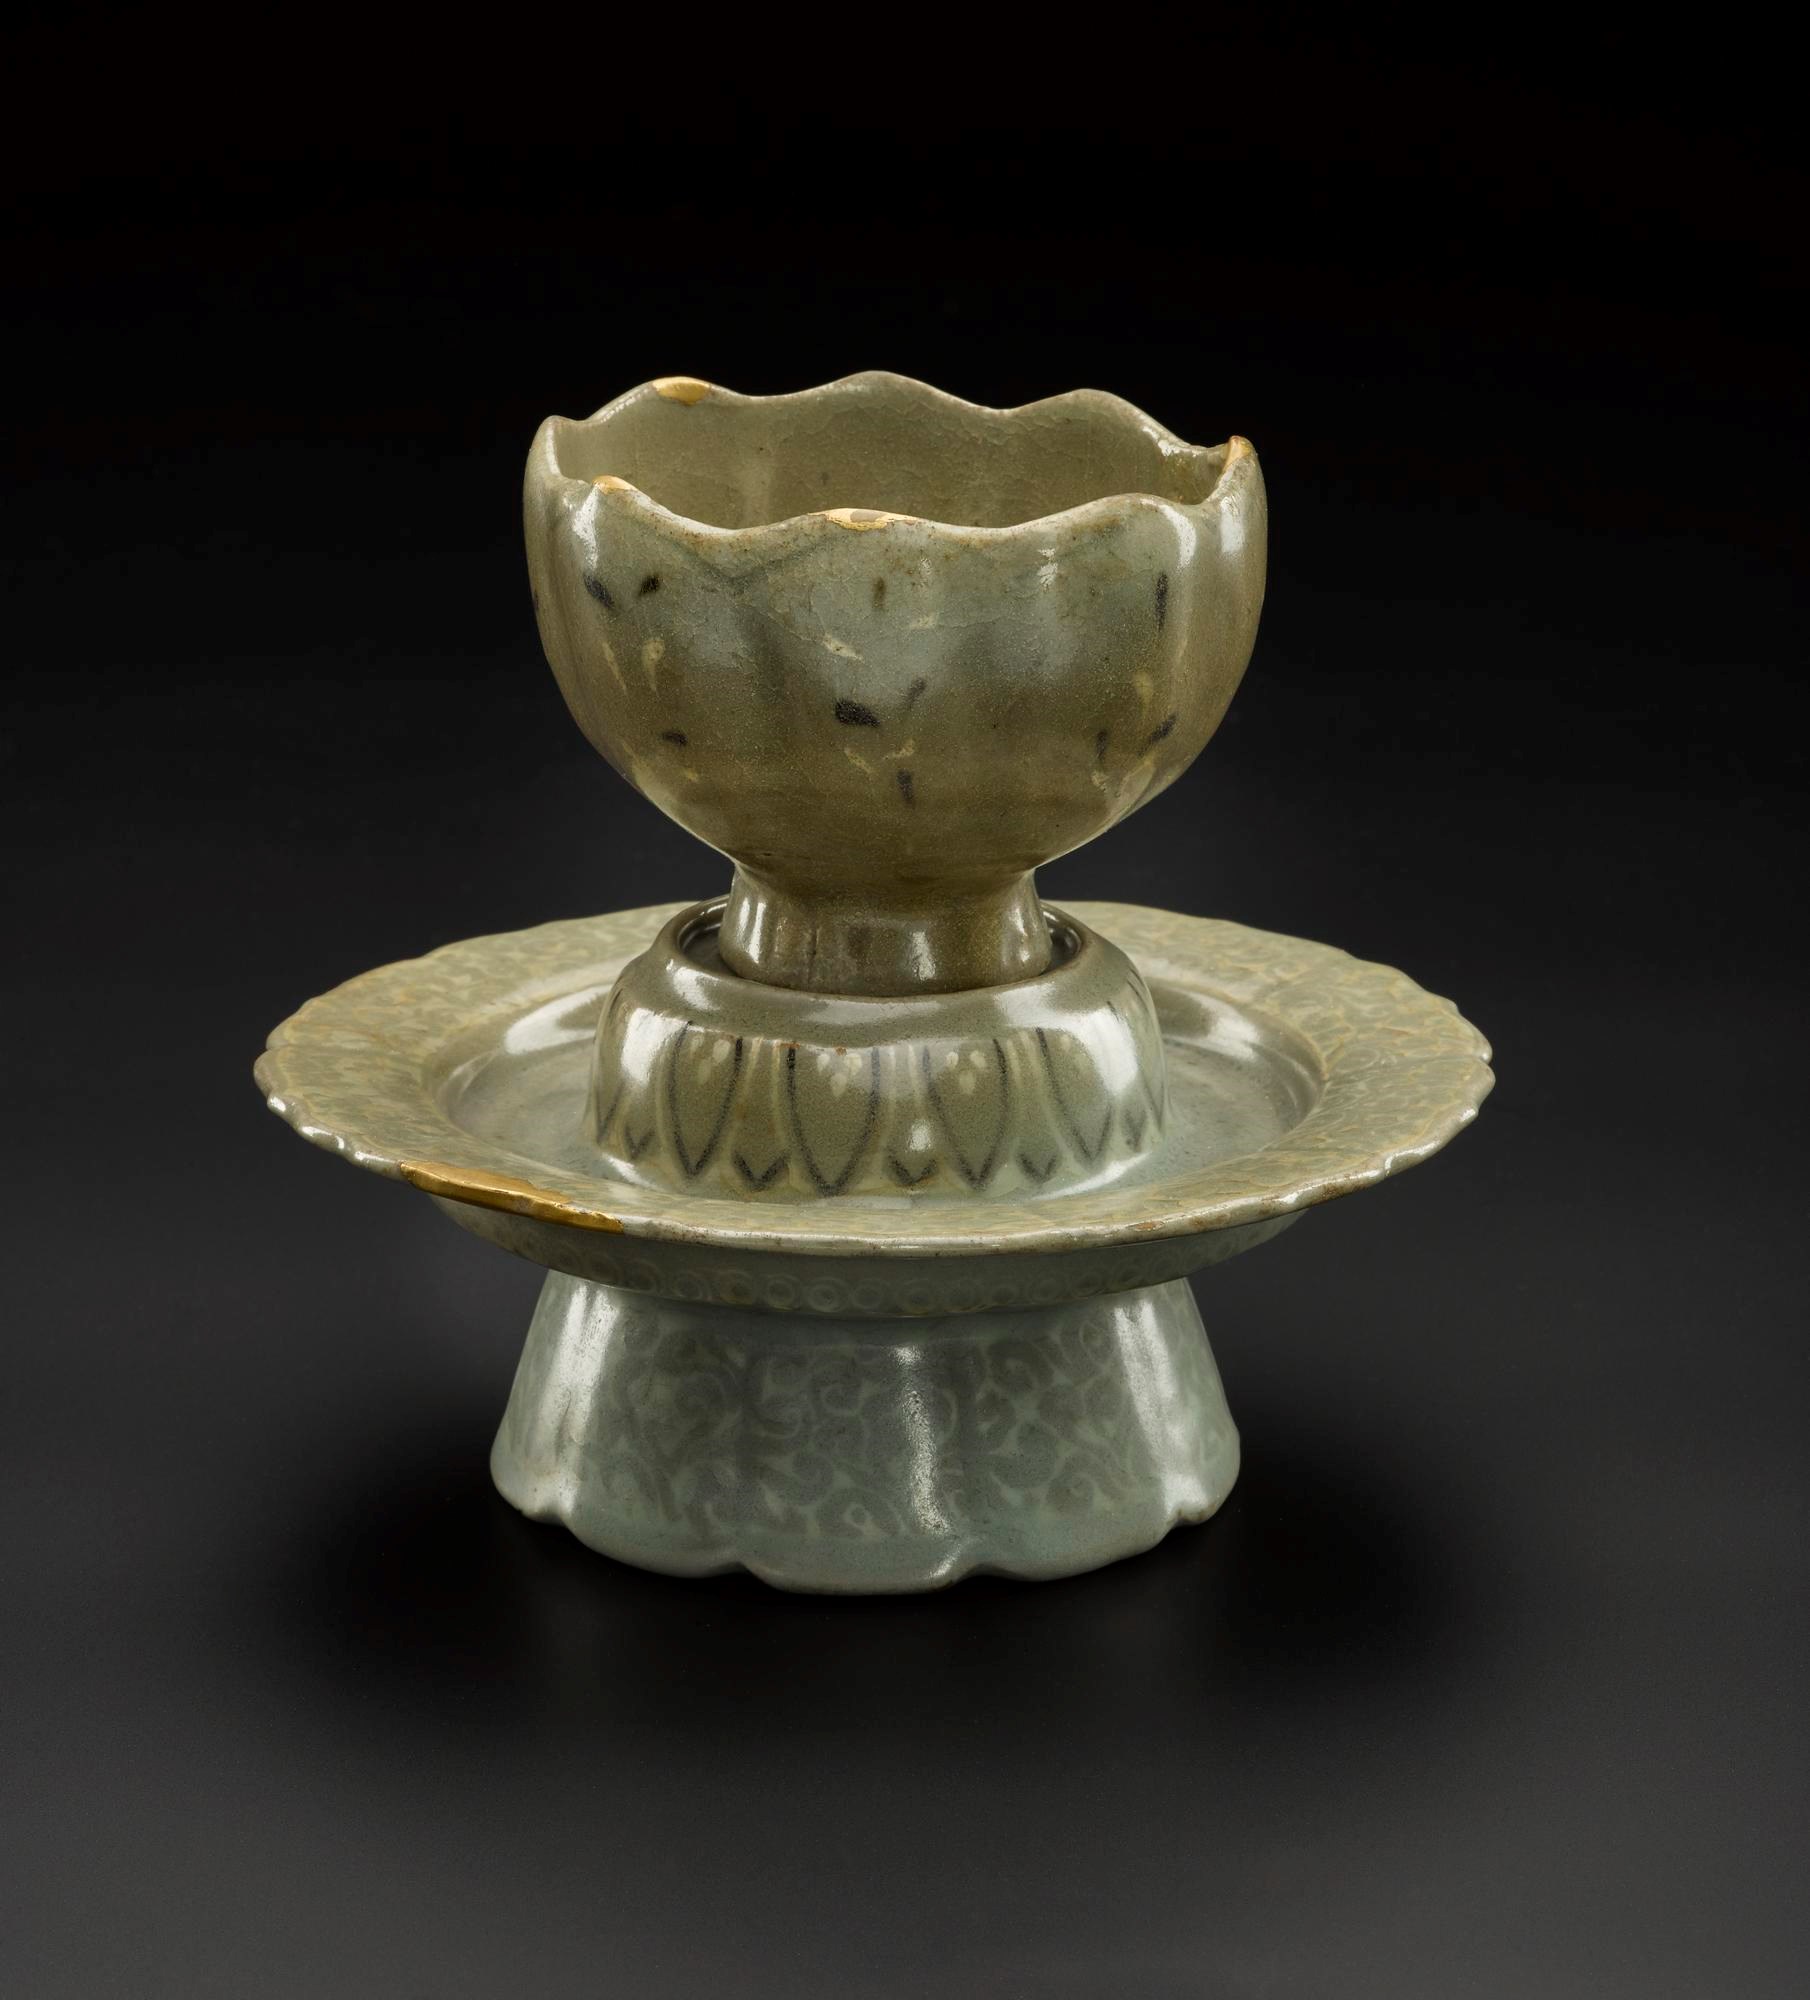 Lotus-shaped cup and stand of stoneware, decorated with inlaid designs in white and brown slip under a blue-green glaze: Korea, Goryeo Dynasty, 918 - 1392 AD.